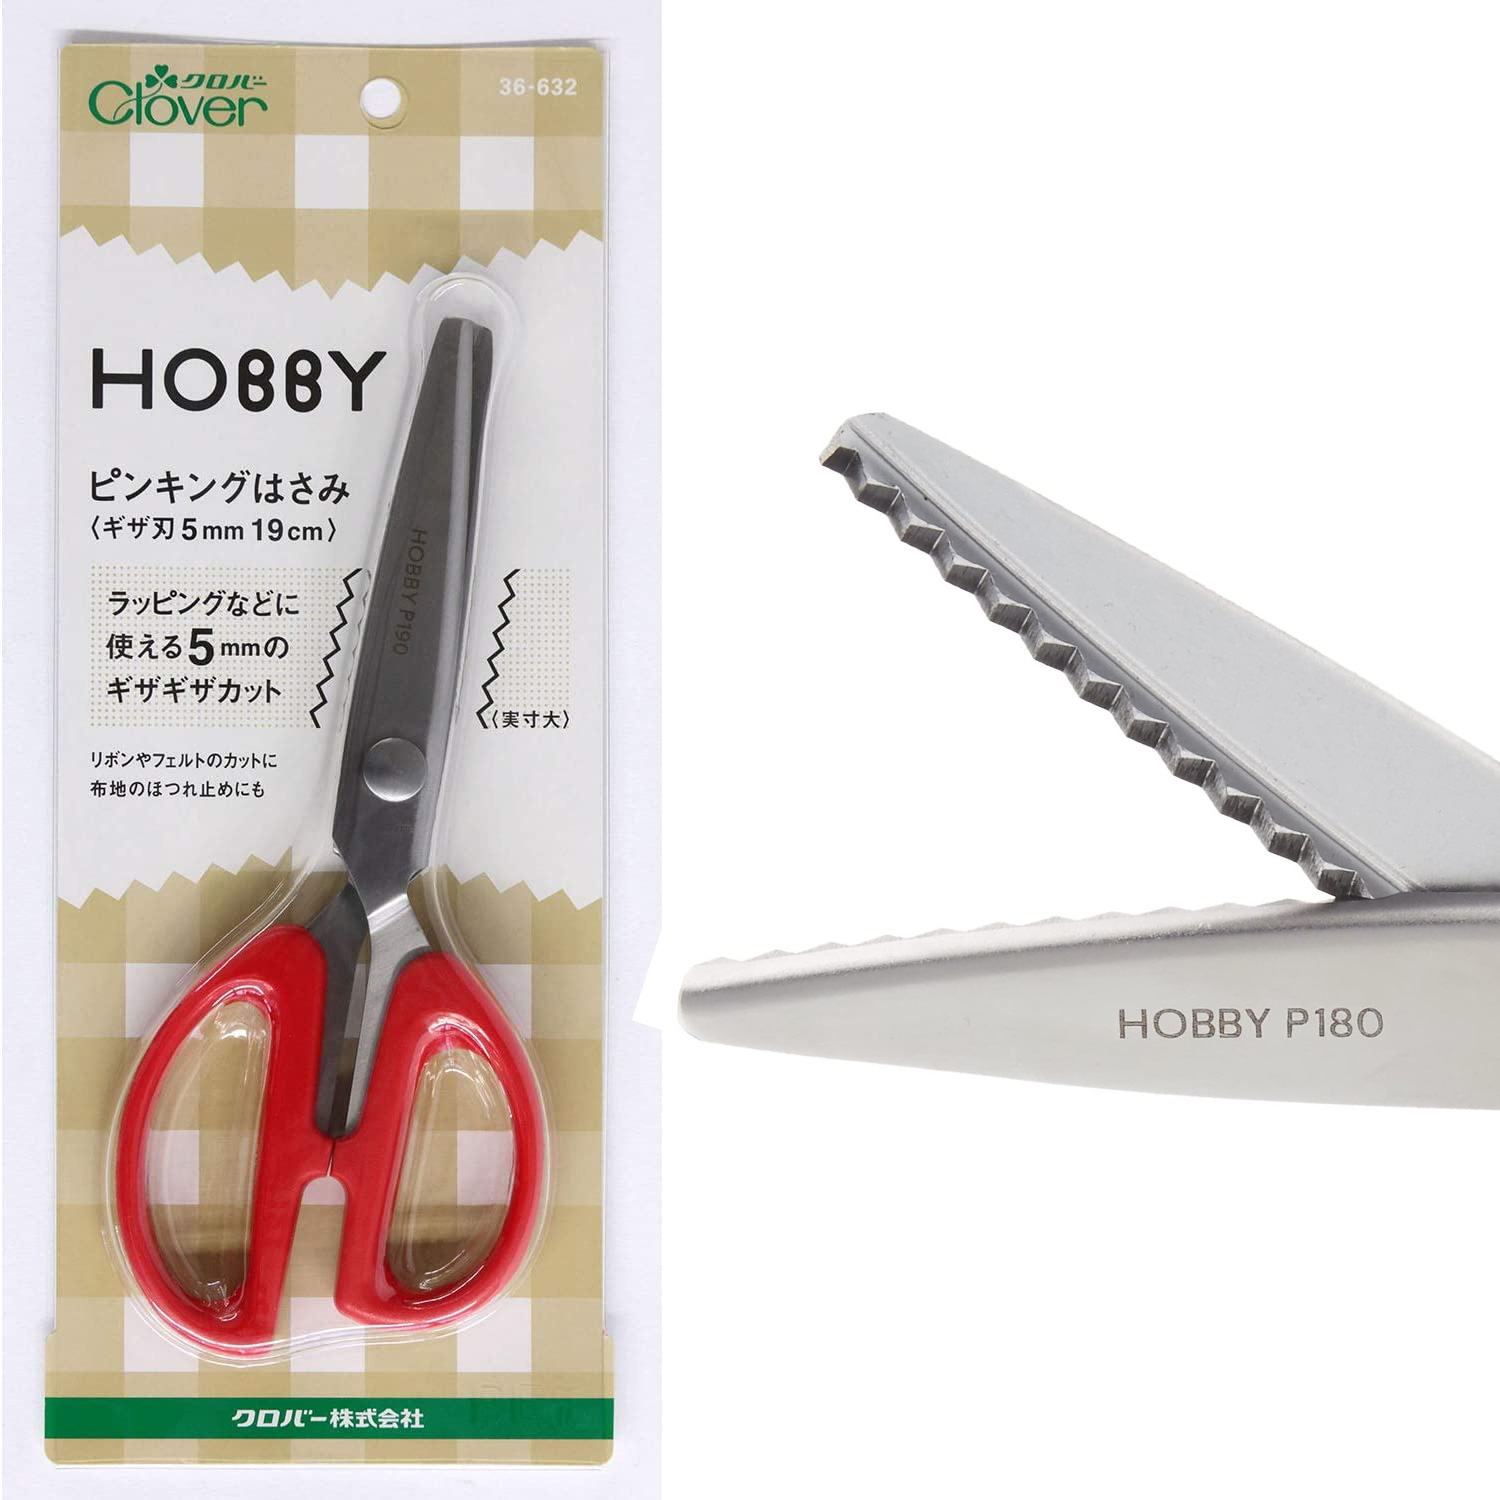 CL36-632 Hobby Pinking Scissors P180 Jagged Blade 5mm Total Length 19cm (pcs)